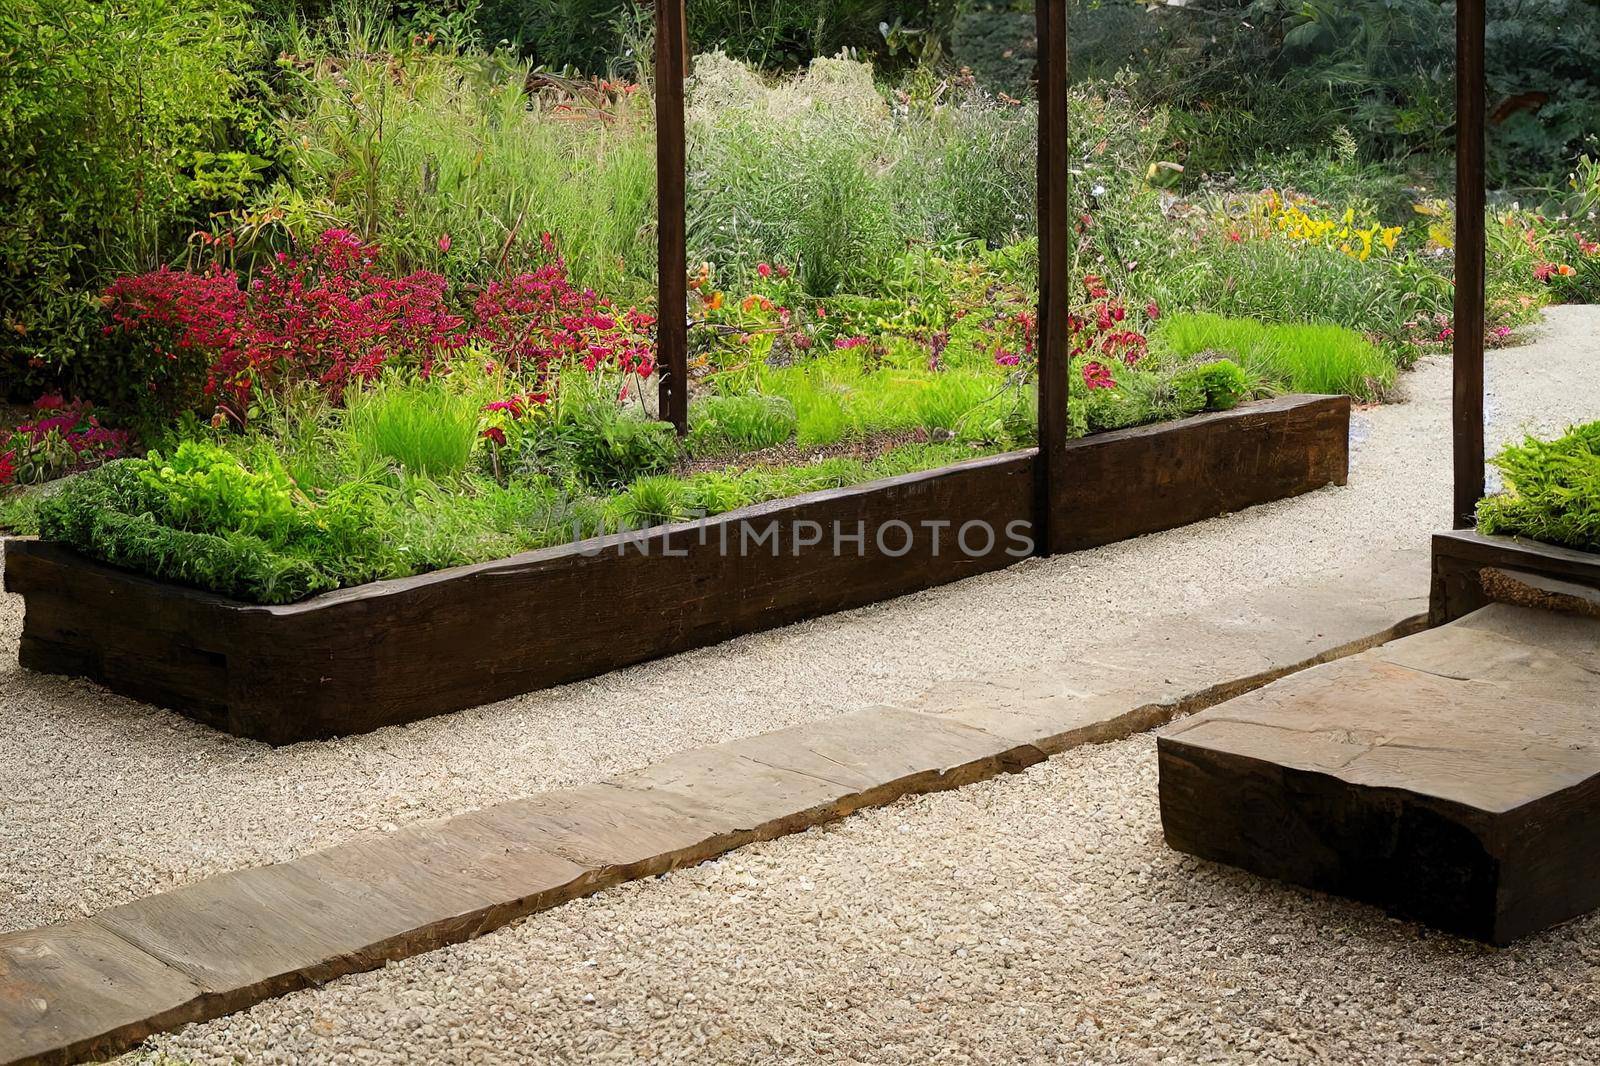 Vintage or rural garden design Enchanting wooden brown bench put on the gravel floor and in front of a natural stone wall overgrown with wild vine plants